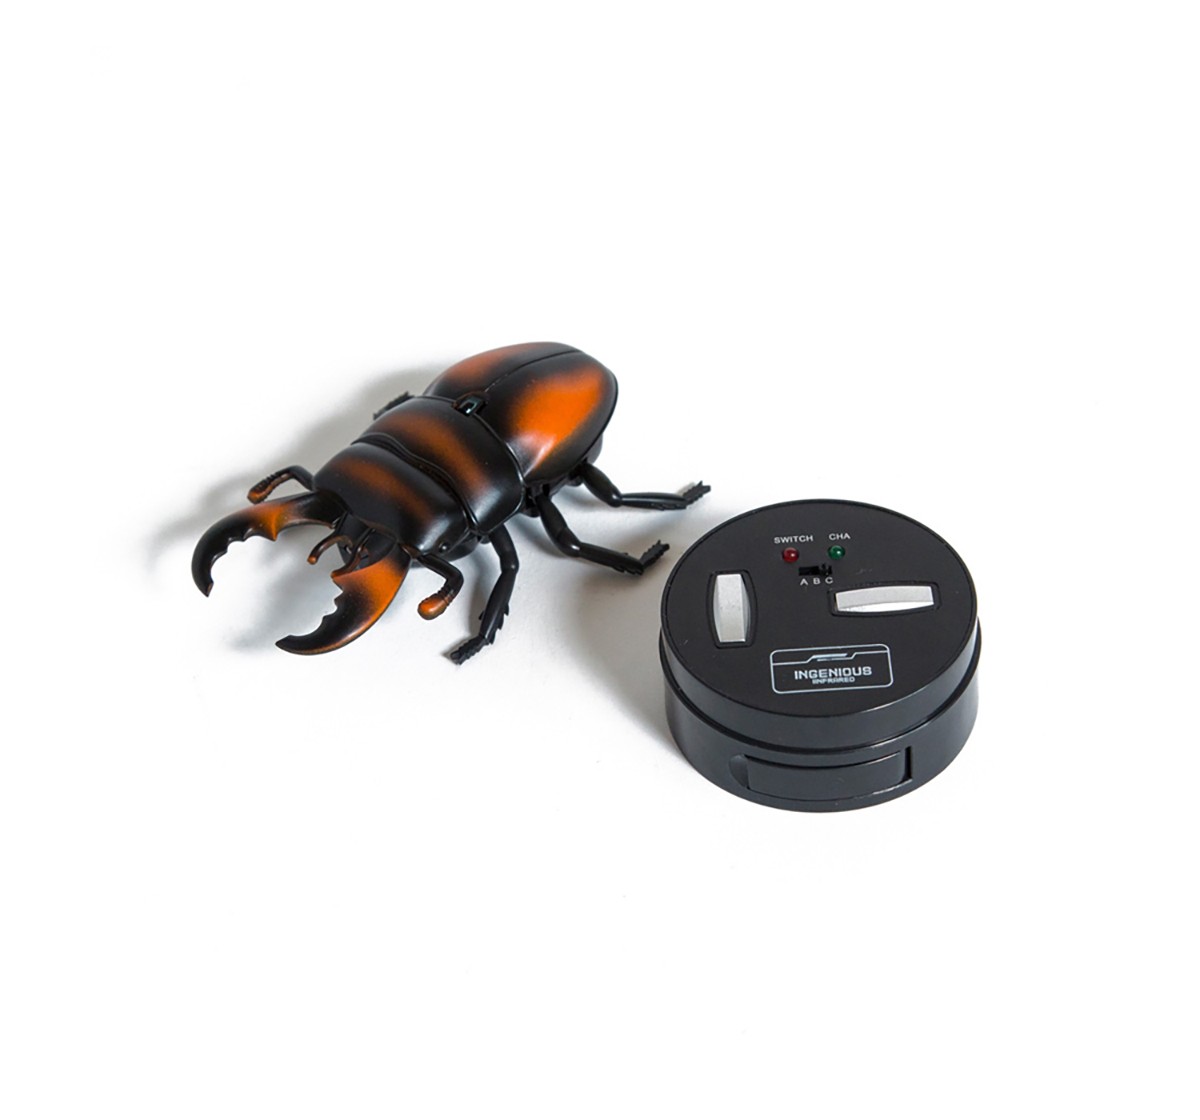 Hamleys Infrared Remote Control Beetle Remote Control Toys for Kids age 5Y+ (Brown)